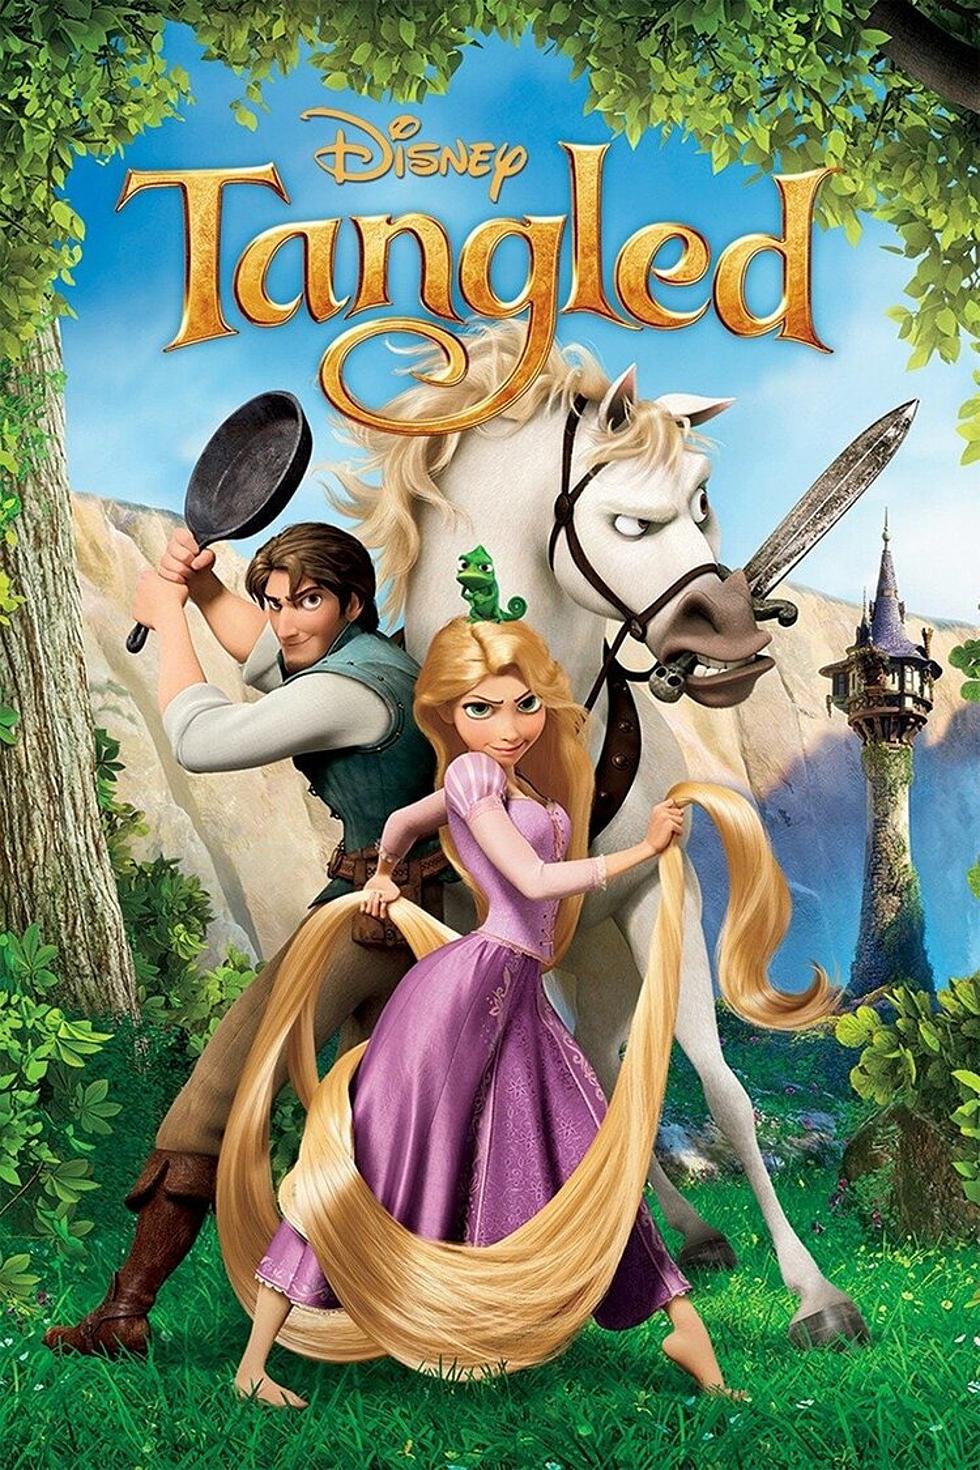 CANCELLED: ‘Tangled’ Is Part Of The Paramount’s Fun Family Film Series